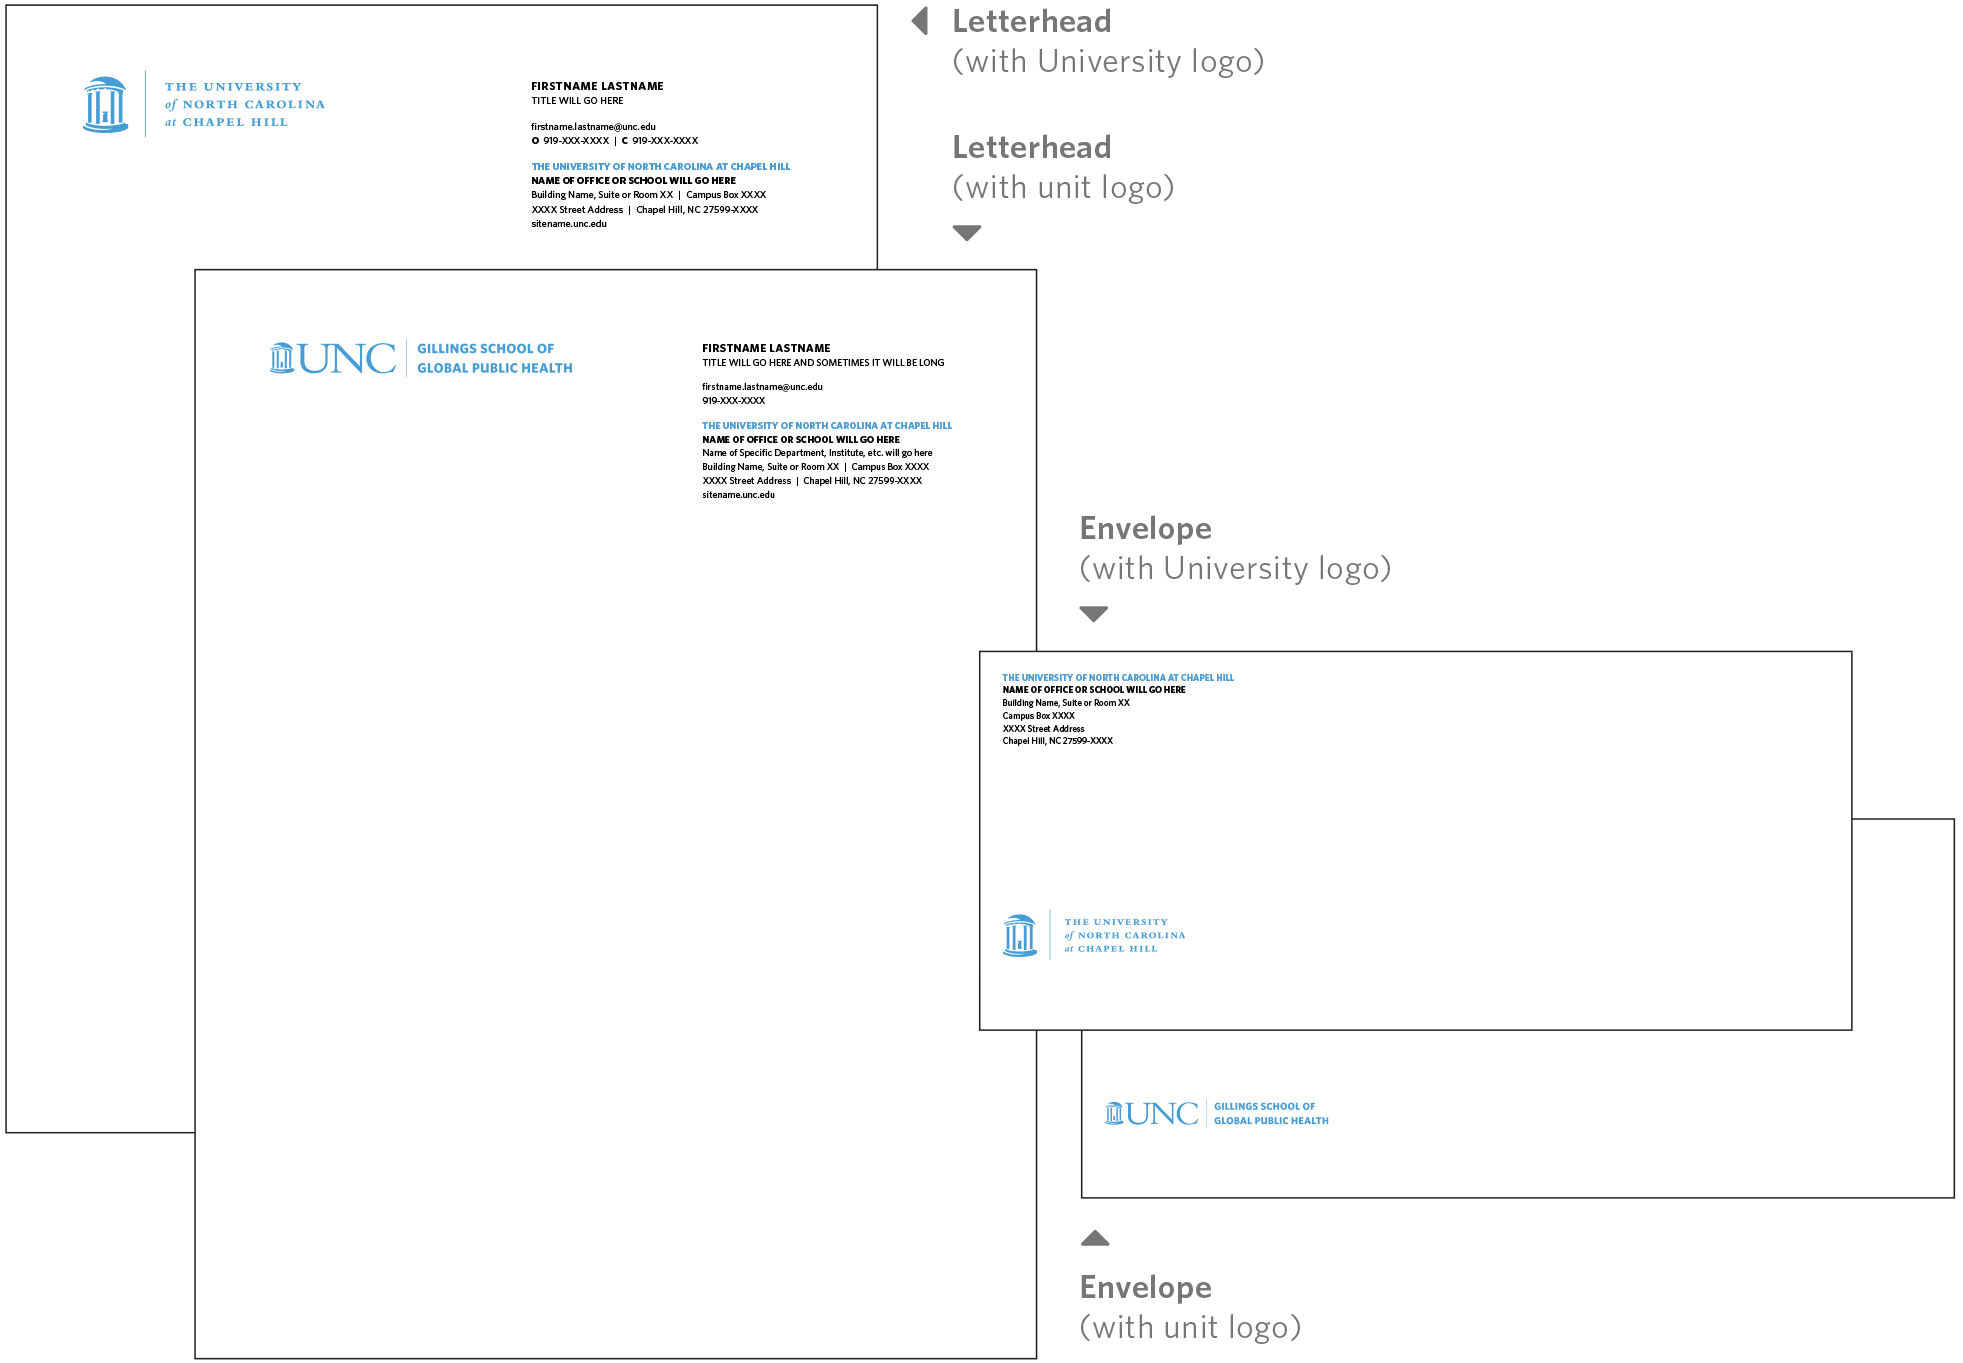 Mockups of the official University templates for printed letterhead and envelopes